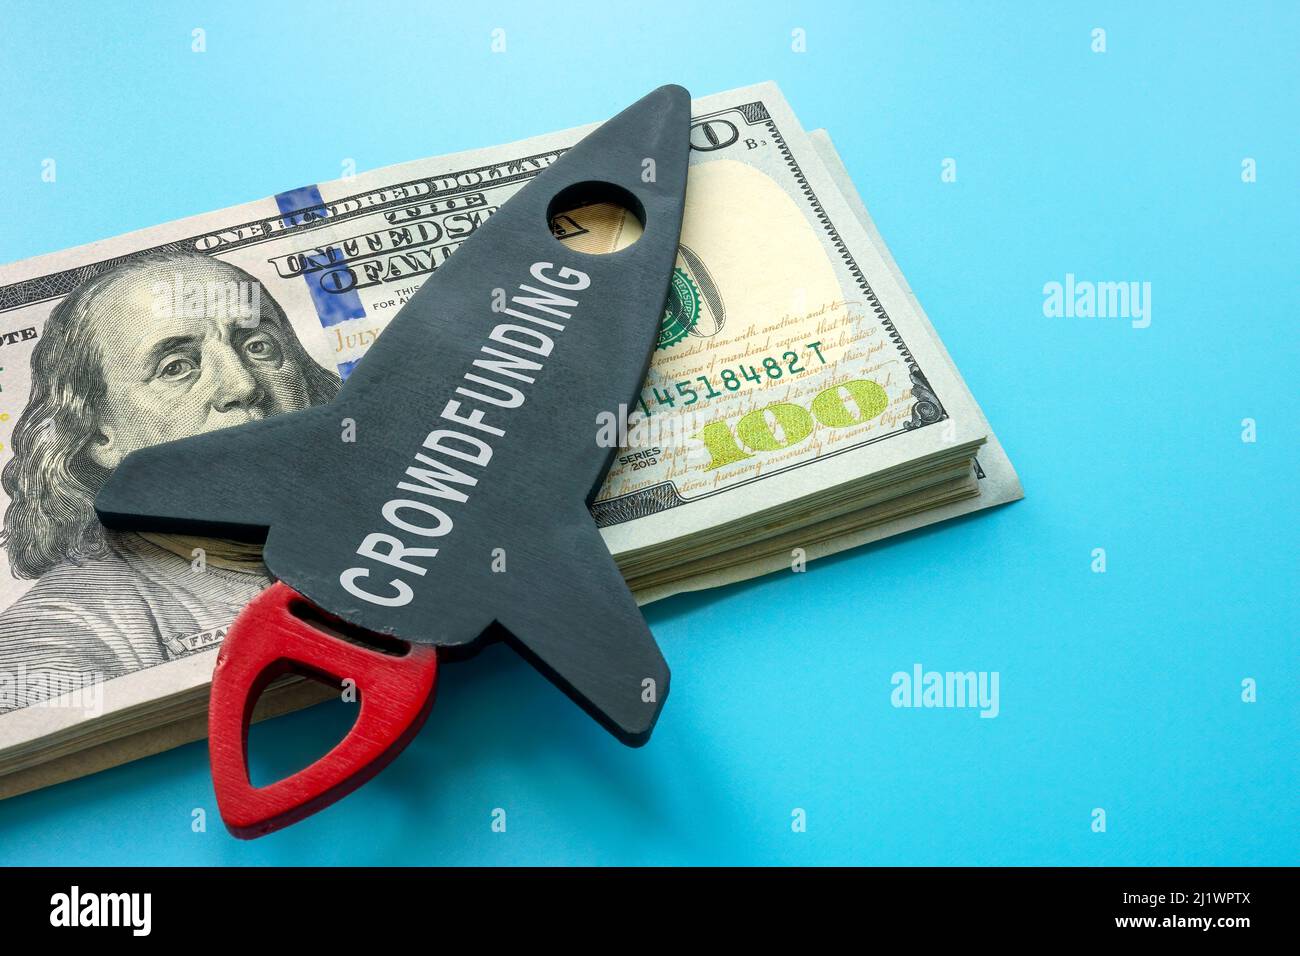 Rocket with the inscription crowdfunding and a bundle of money. Stock Photo